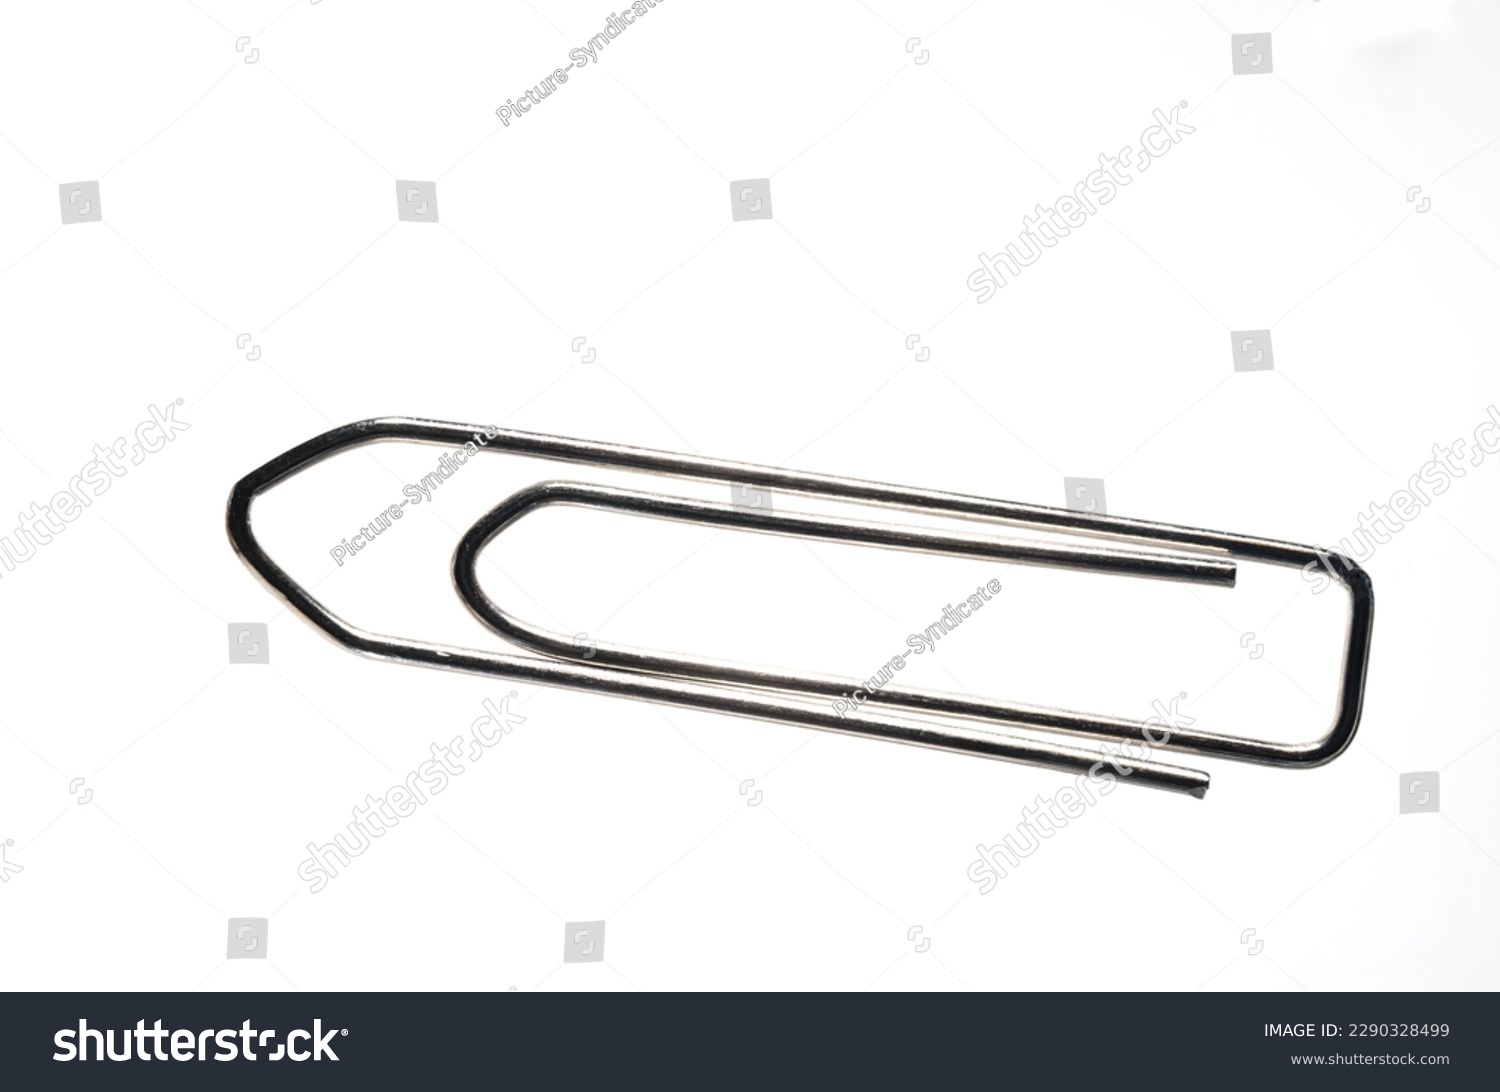 Extreme close up of large silver metal paper clip against white background with copy space as concept for office paperwork and administration #2290328499